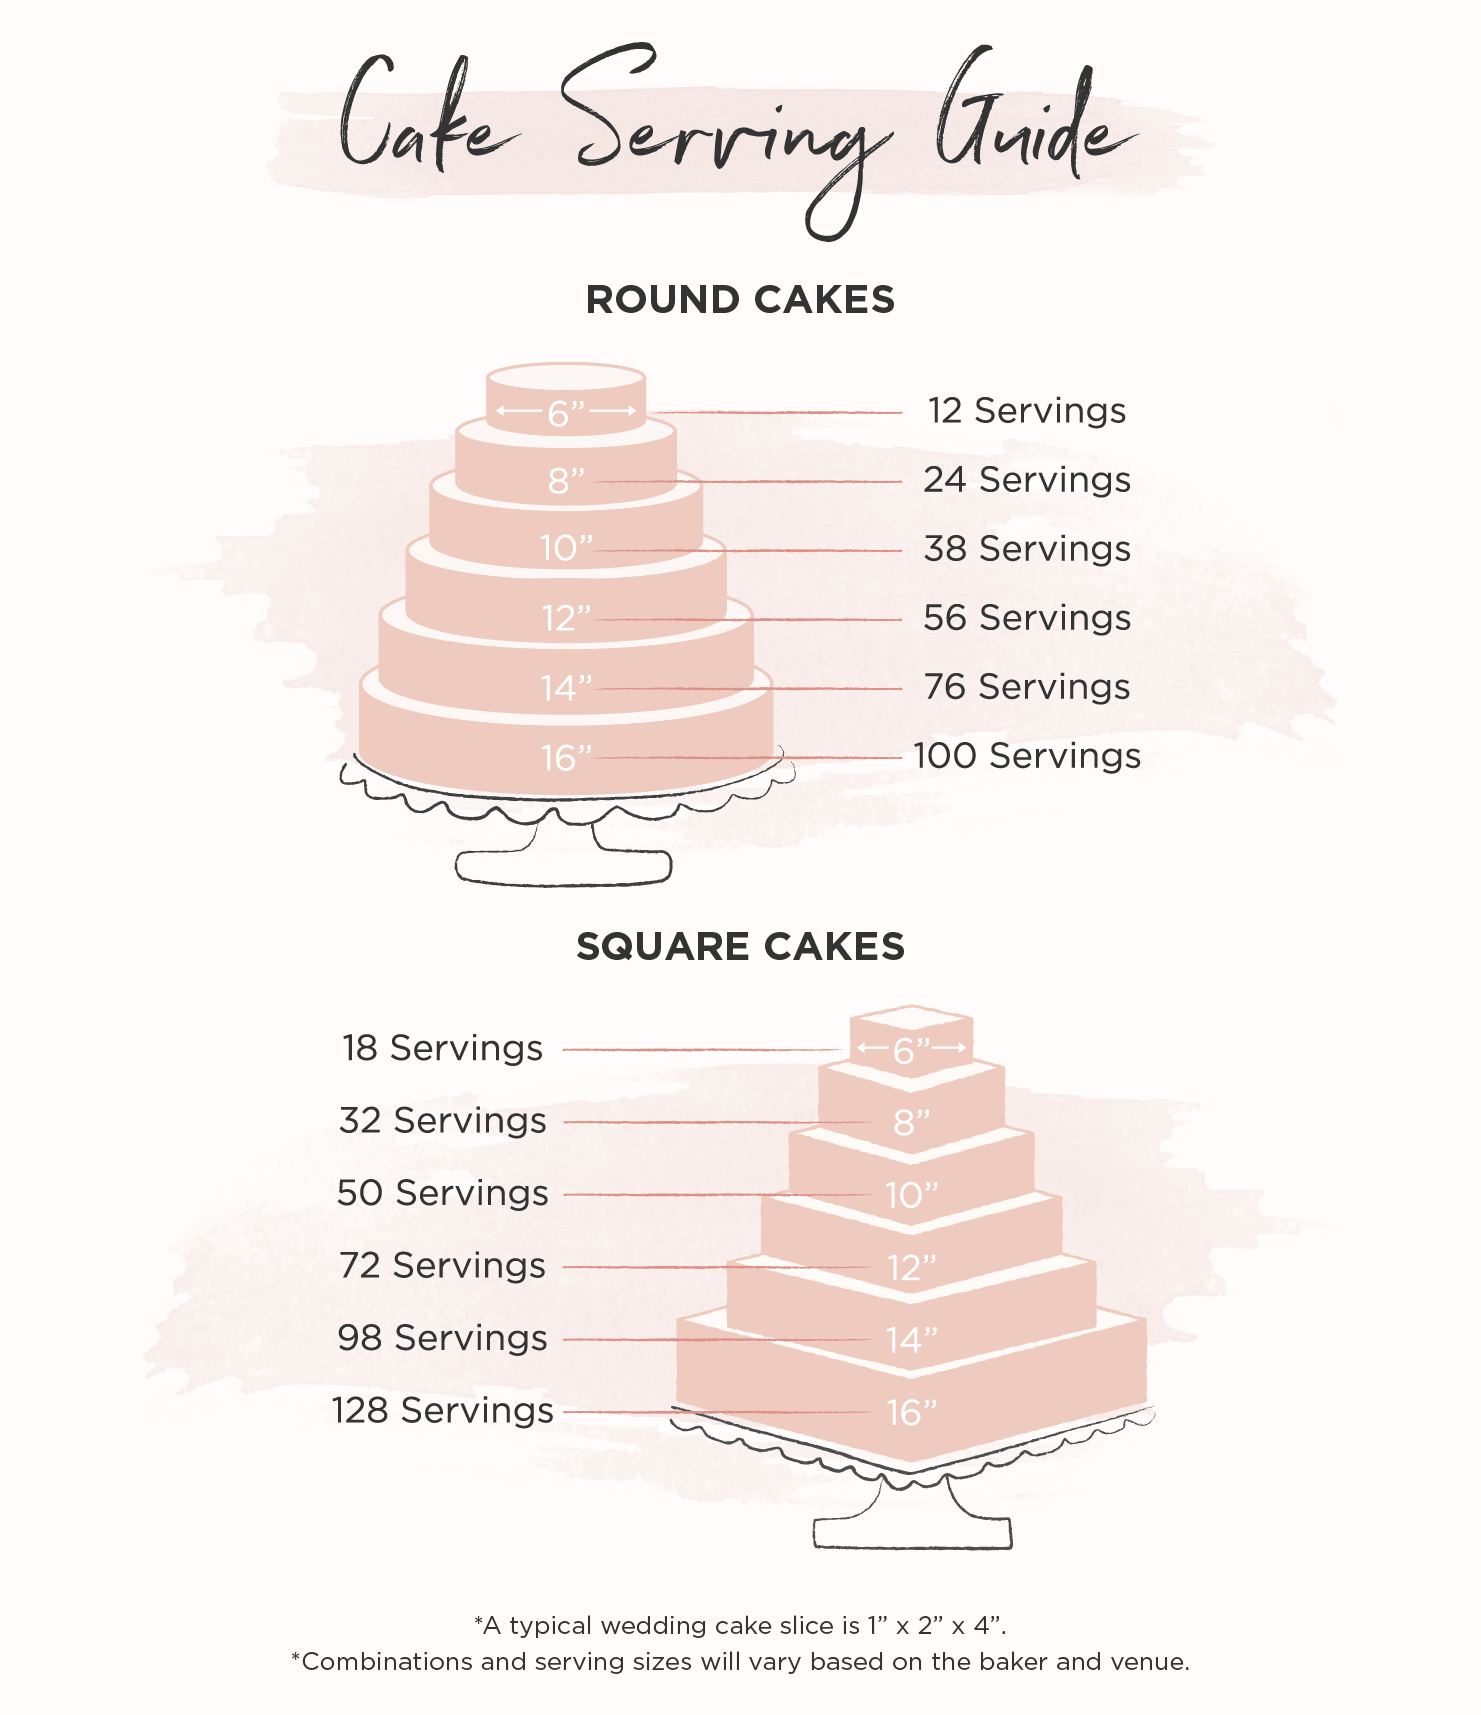 Cake serving guide chart with round and square sizes.